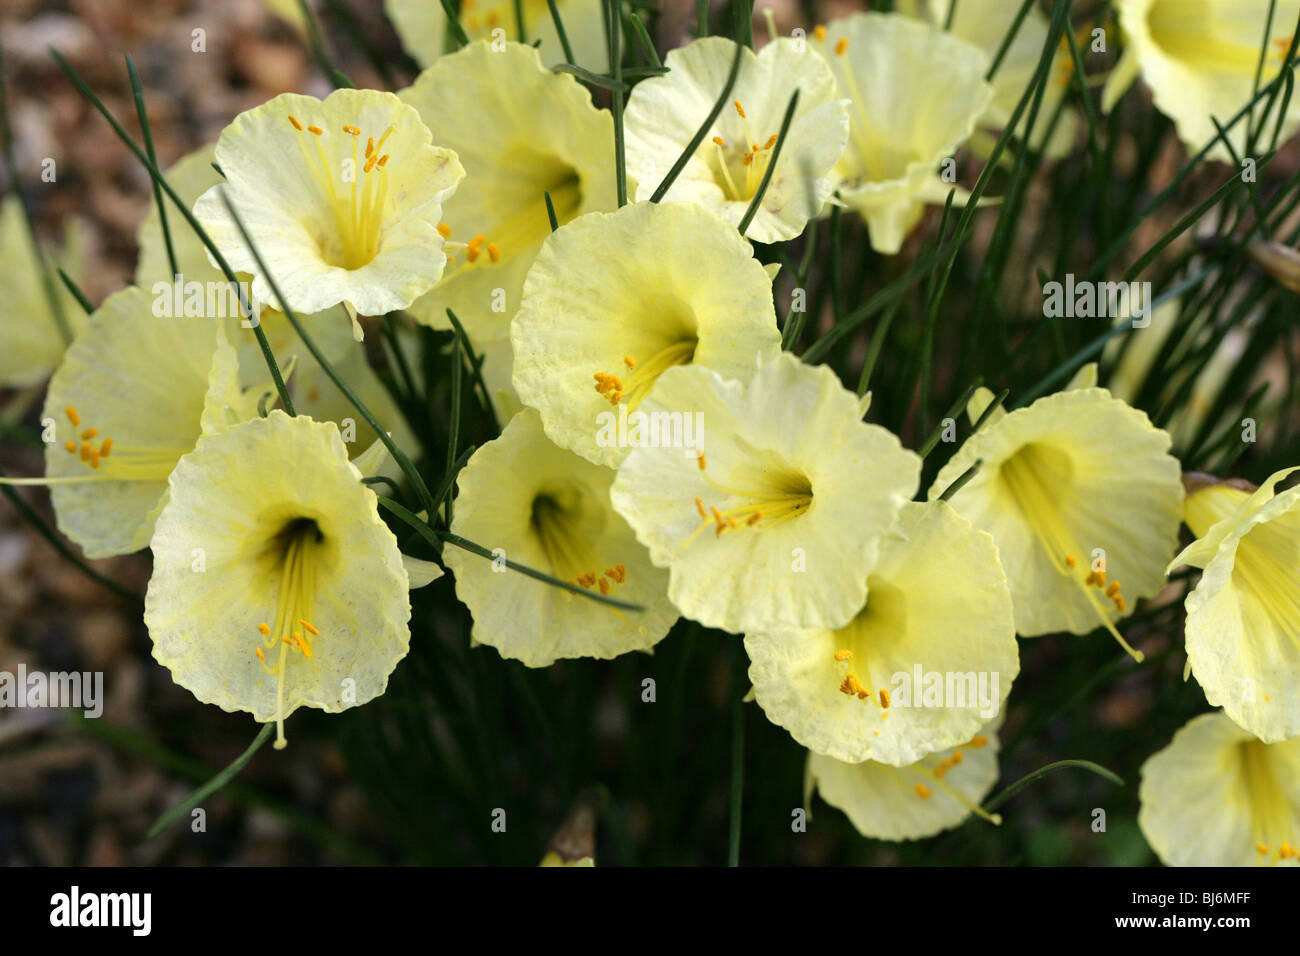 Narcissus Romieuxii, Amaryllidaceae, Marocco, Africa del Nord Foto Stock